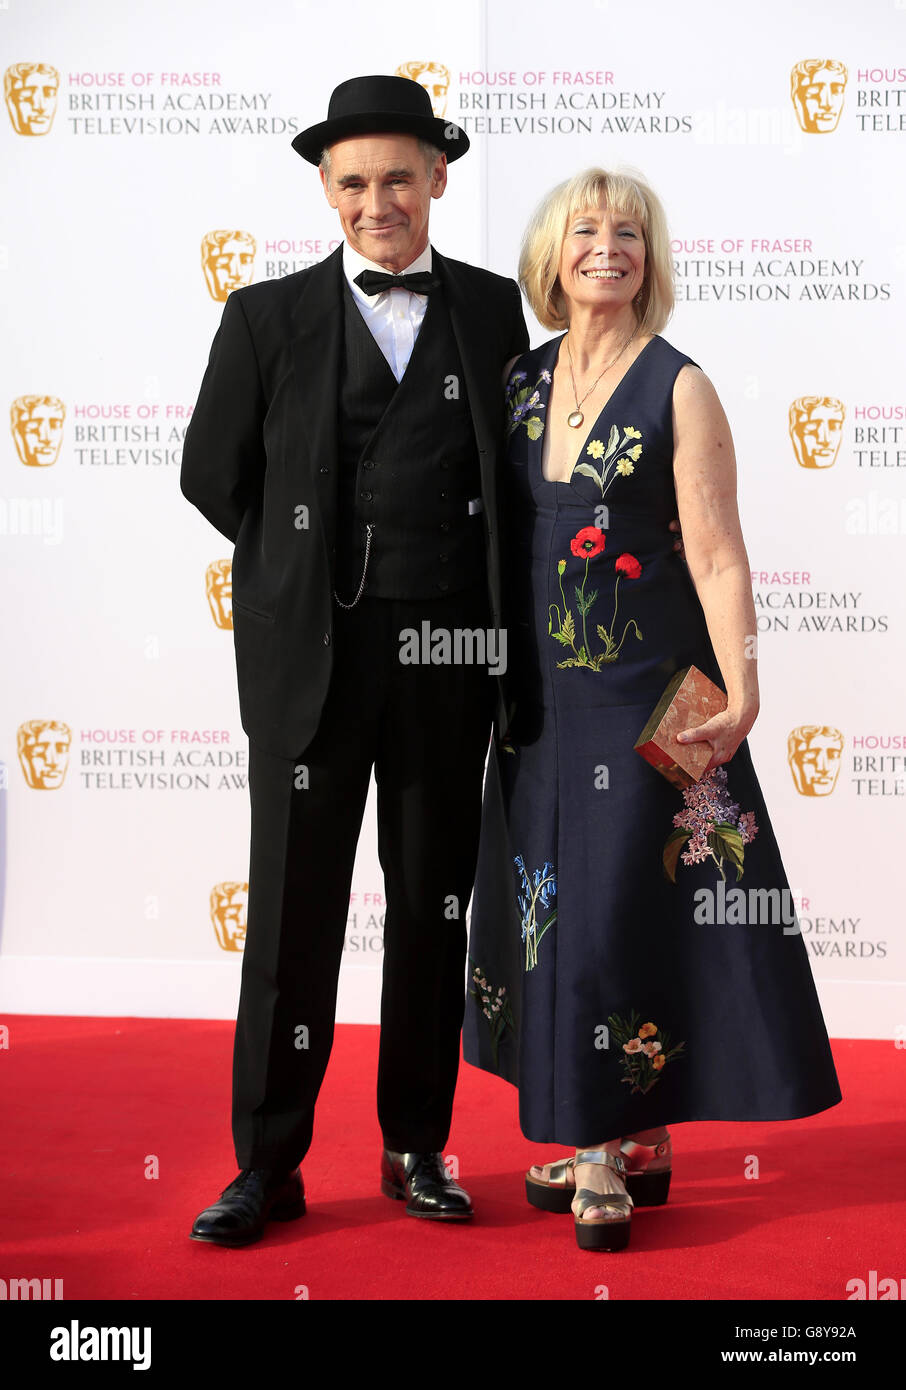 Mark Rylance and Claire van Kampen attending the House of Fraser BAFTA TV Awards 2016 at the Royal Festival Hall, Southbank, London. PRESS ASSOCIATION Photo. Picture date: Sunday 8th May 2016. See PA Story SHOWBIZ Bafta. Photo credit should read: Jonathan Brady/PA Wire Stock Photo